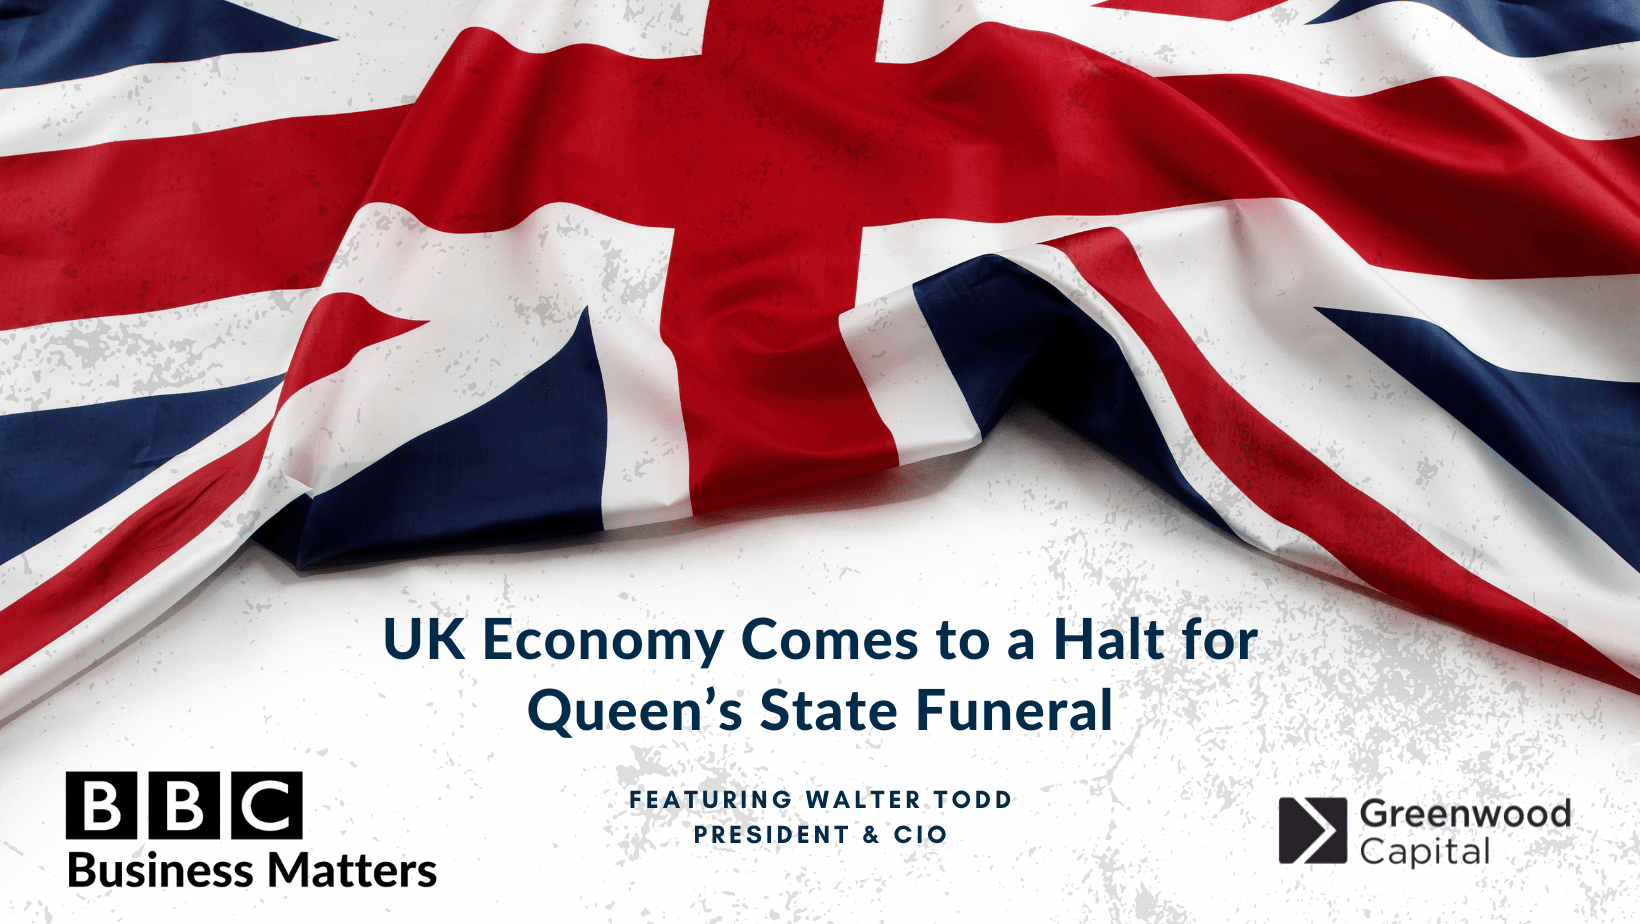 Union Jack flag with text: UK Economy Comes to a Halt for Queen's State Funeral